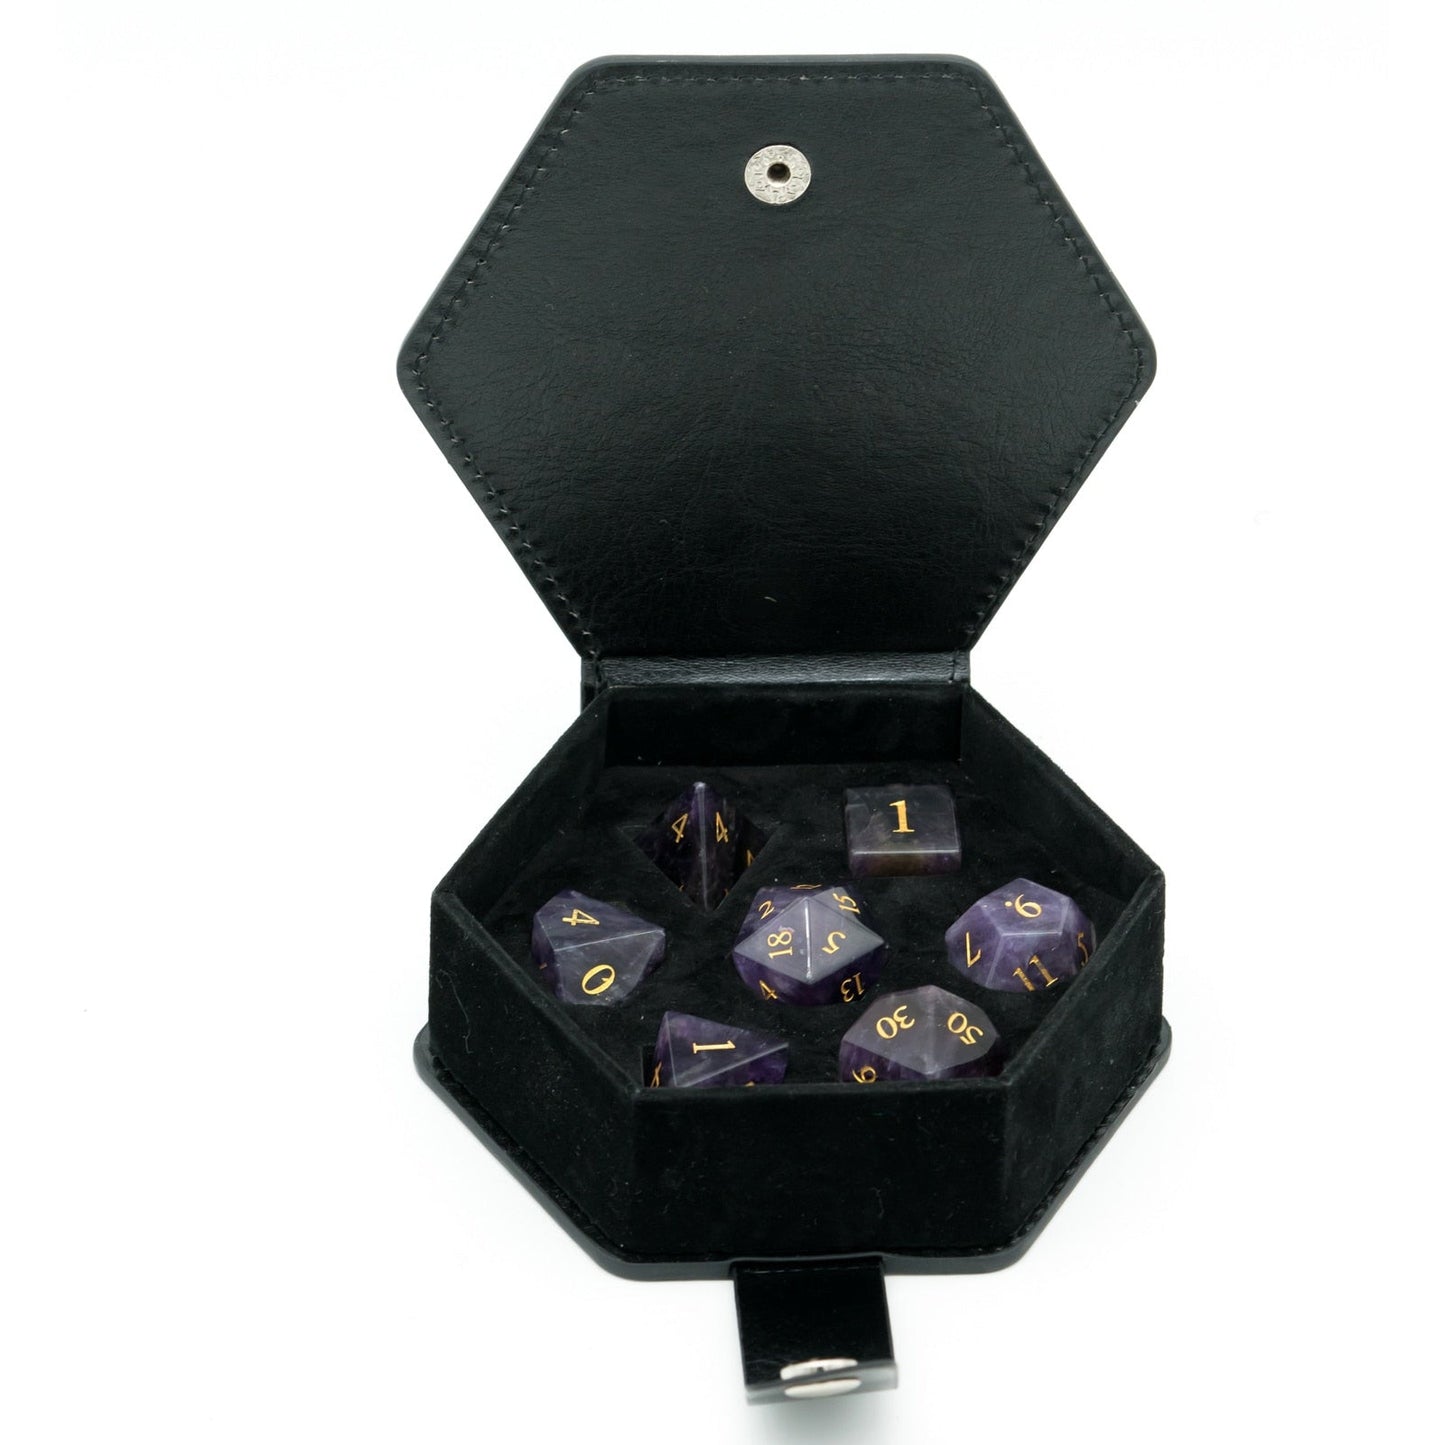 stone dice set in their case